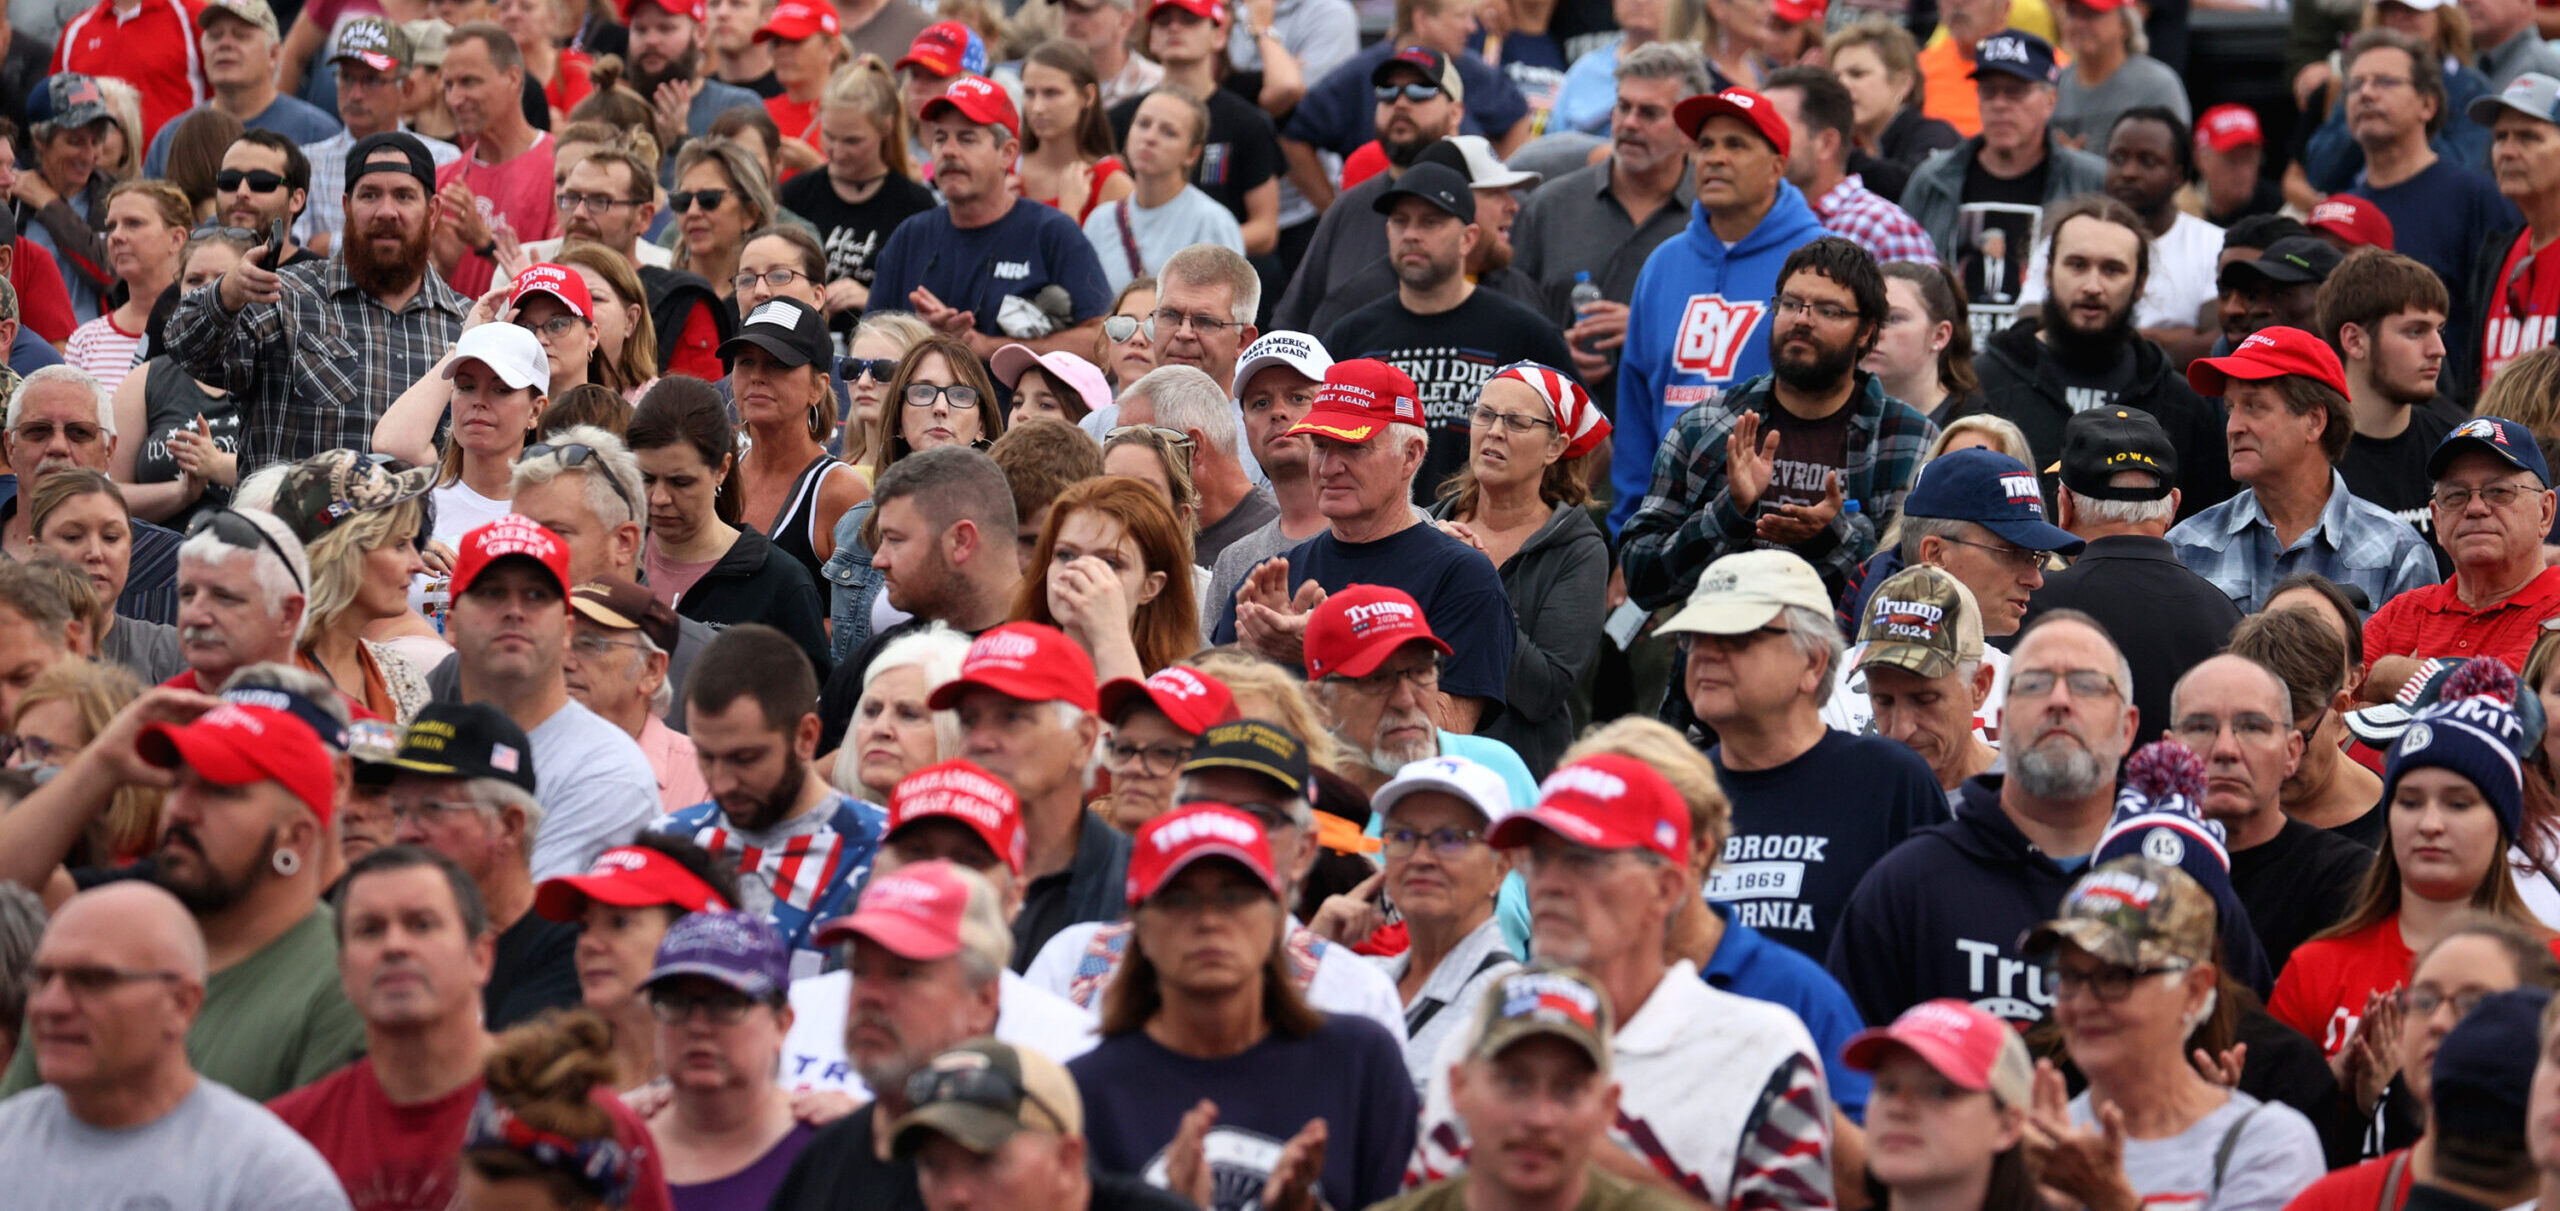 People gather at Trump rally at the Iowa State Fairgrounds, October 9, 2021 (Scott Olson/Getty Images)